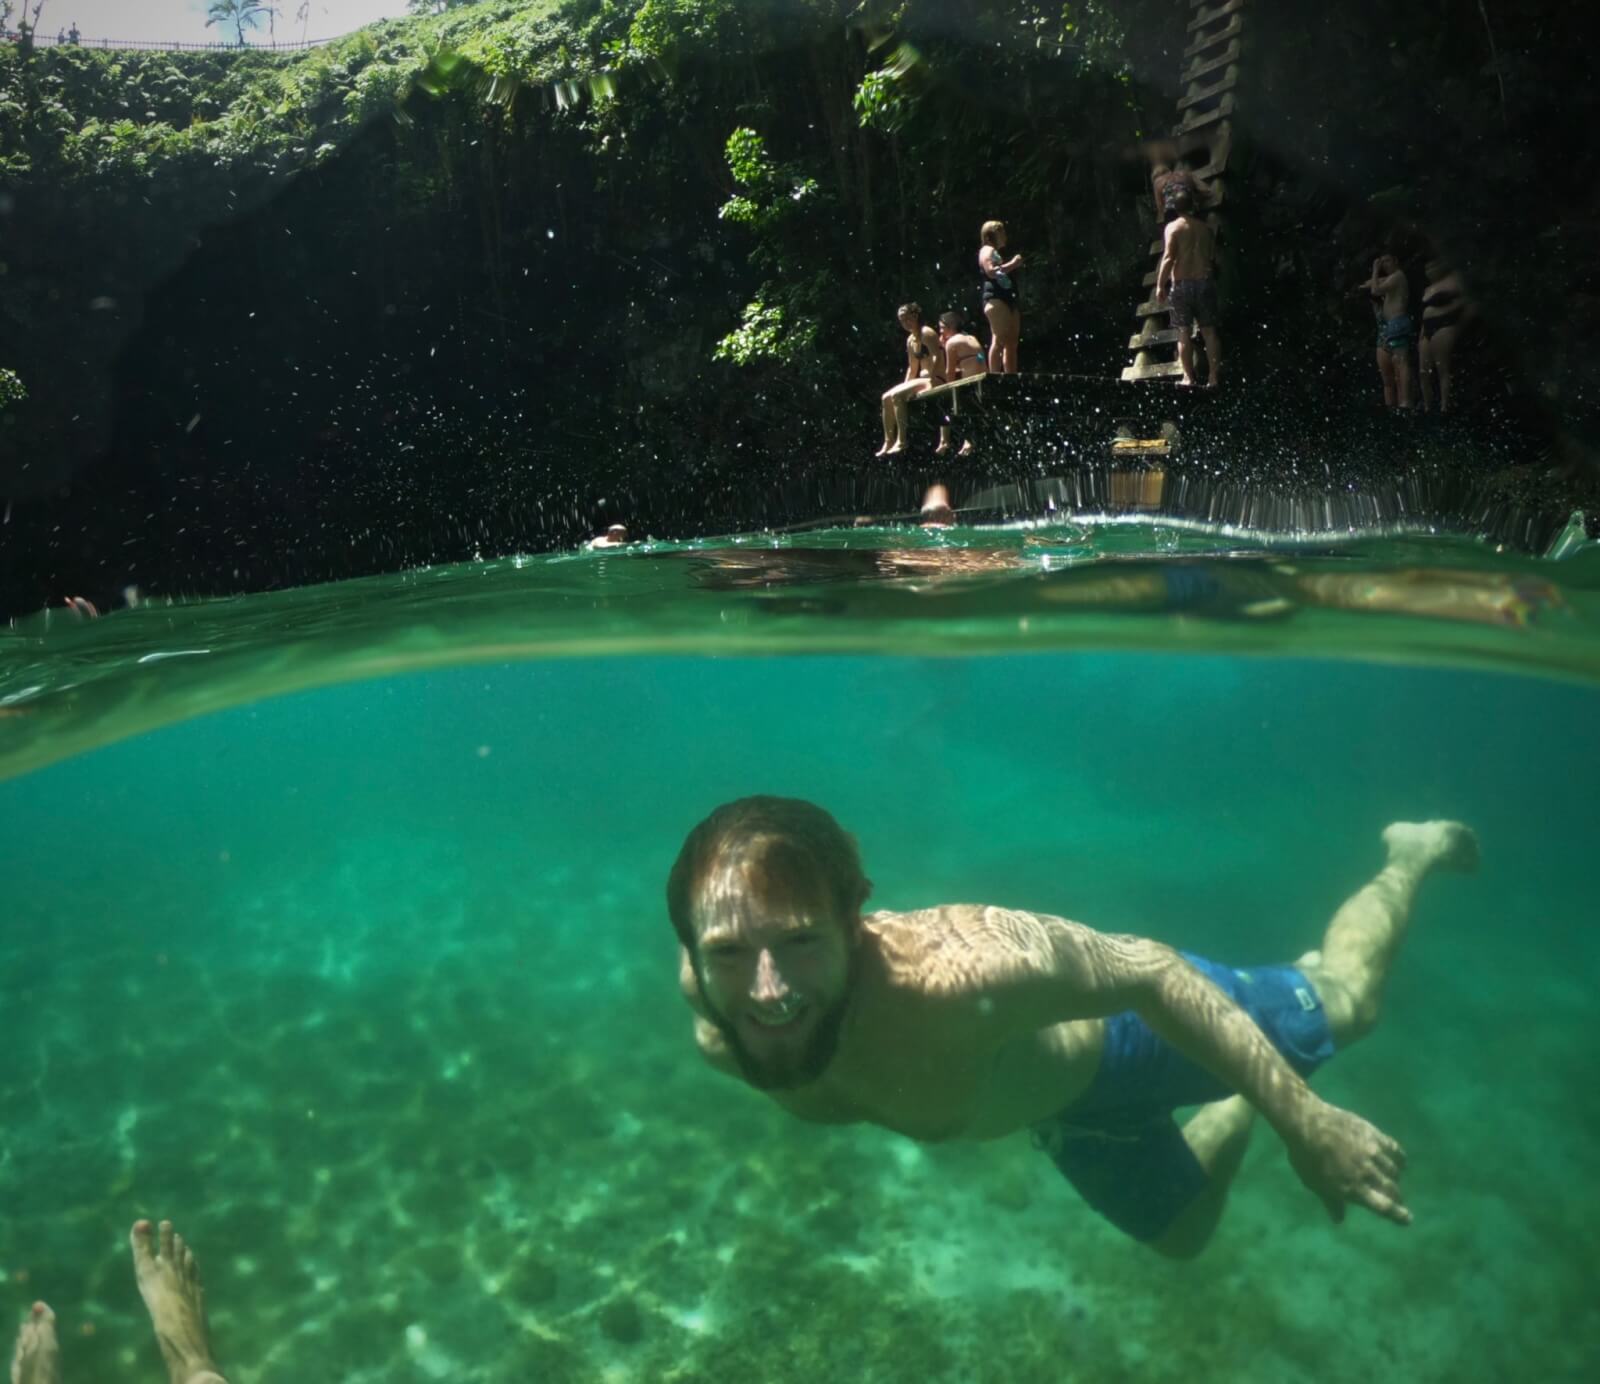 Enrico swimming underwater in To Sua Ocean Trench - one of the best things to do in Upolu, Samoa